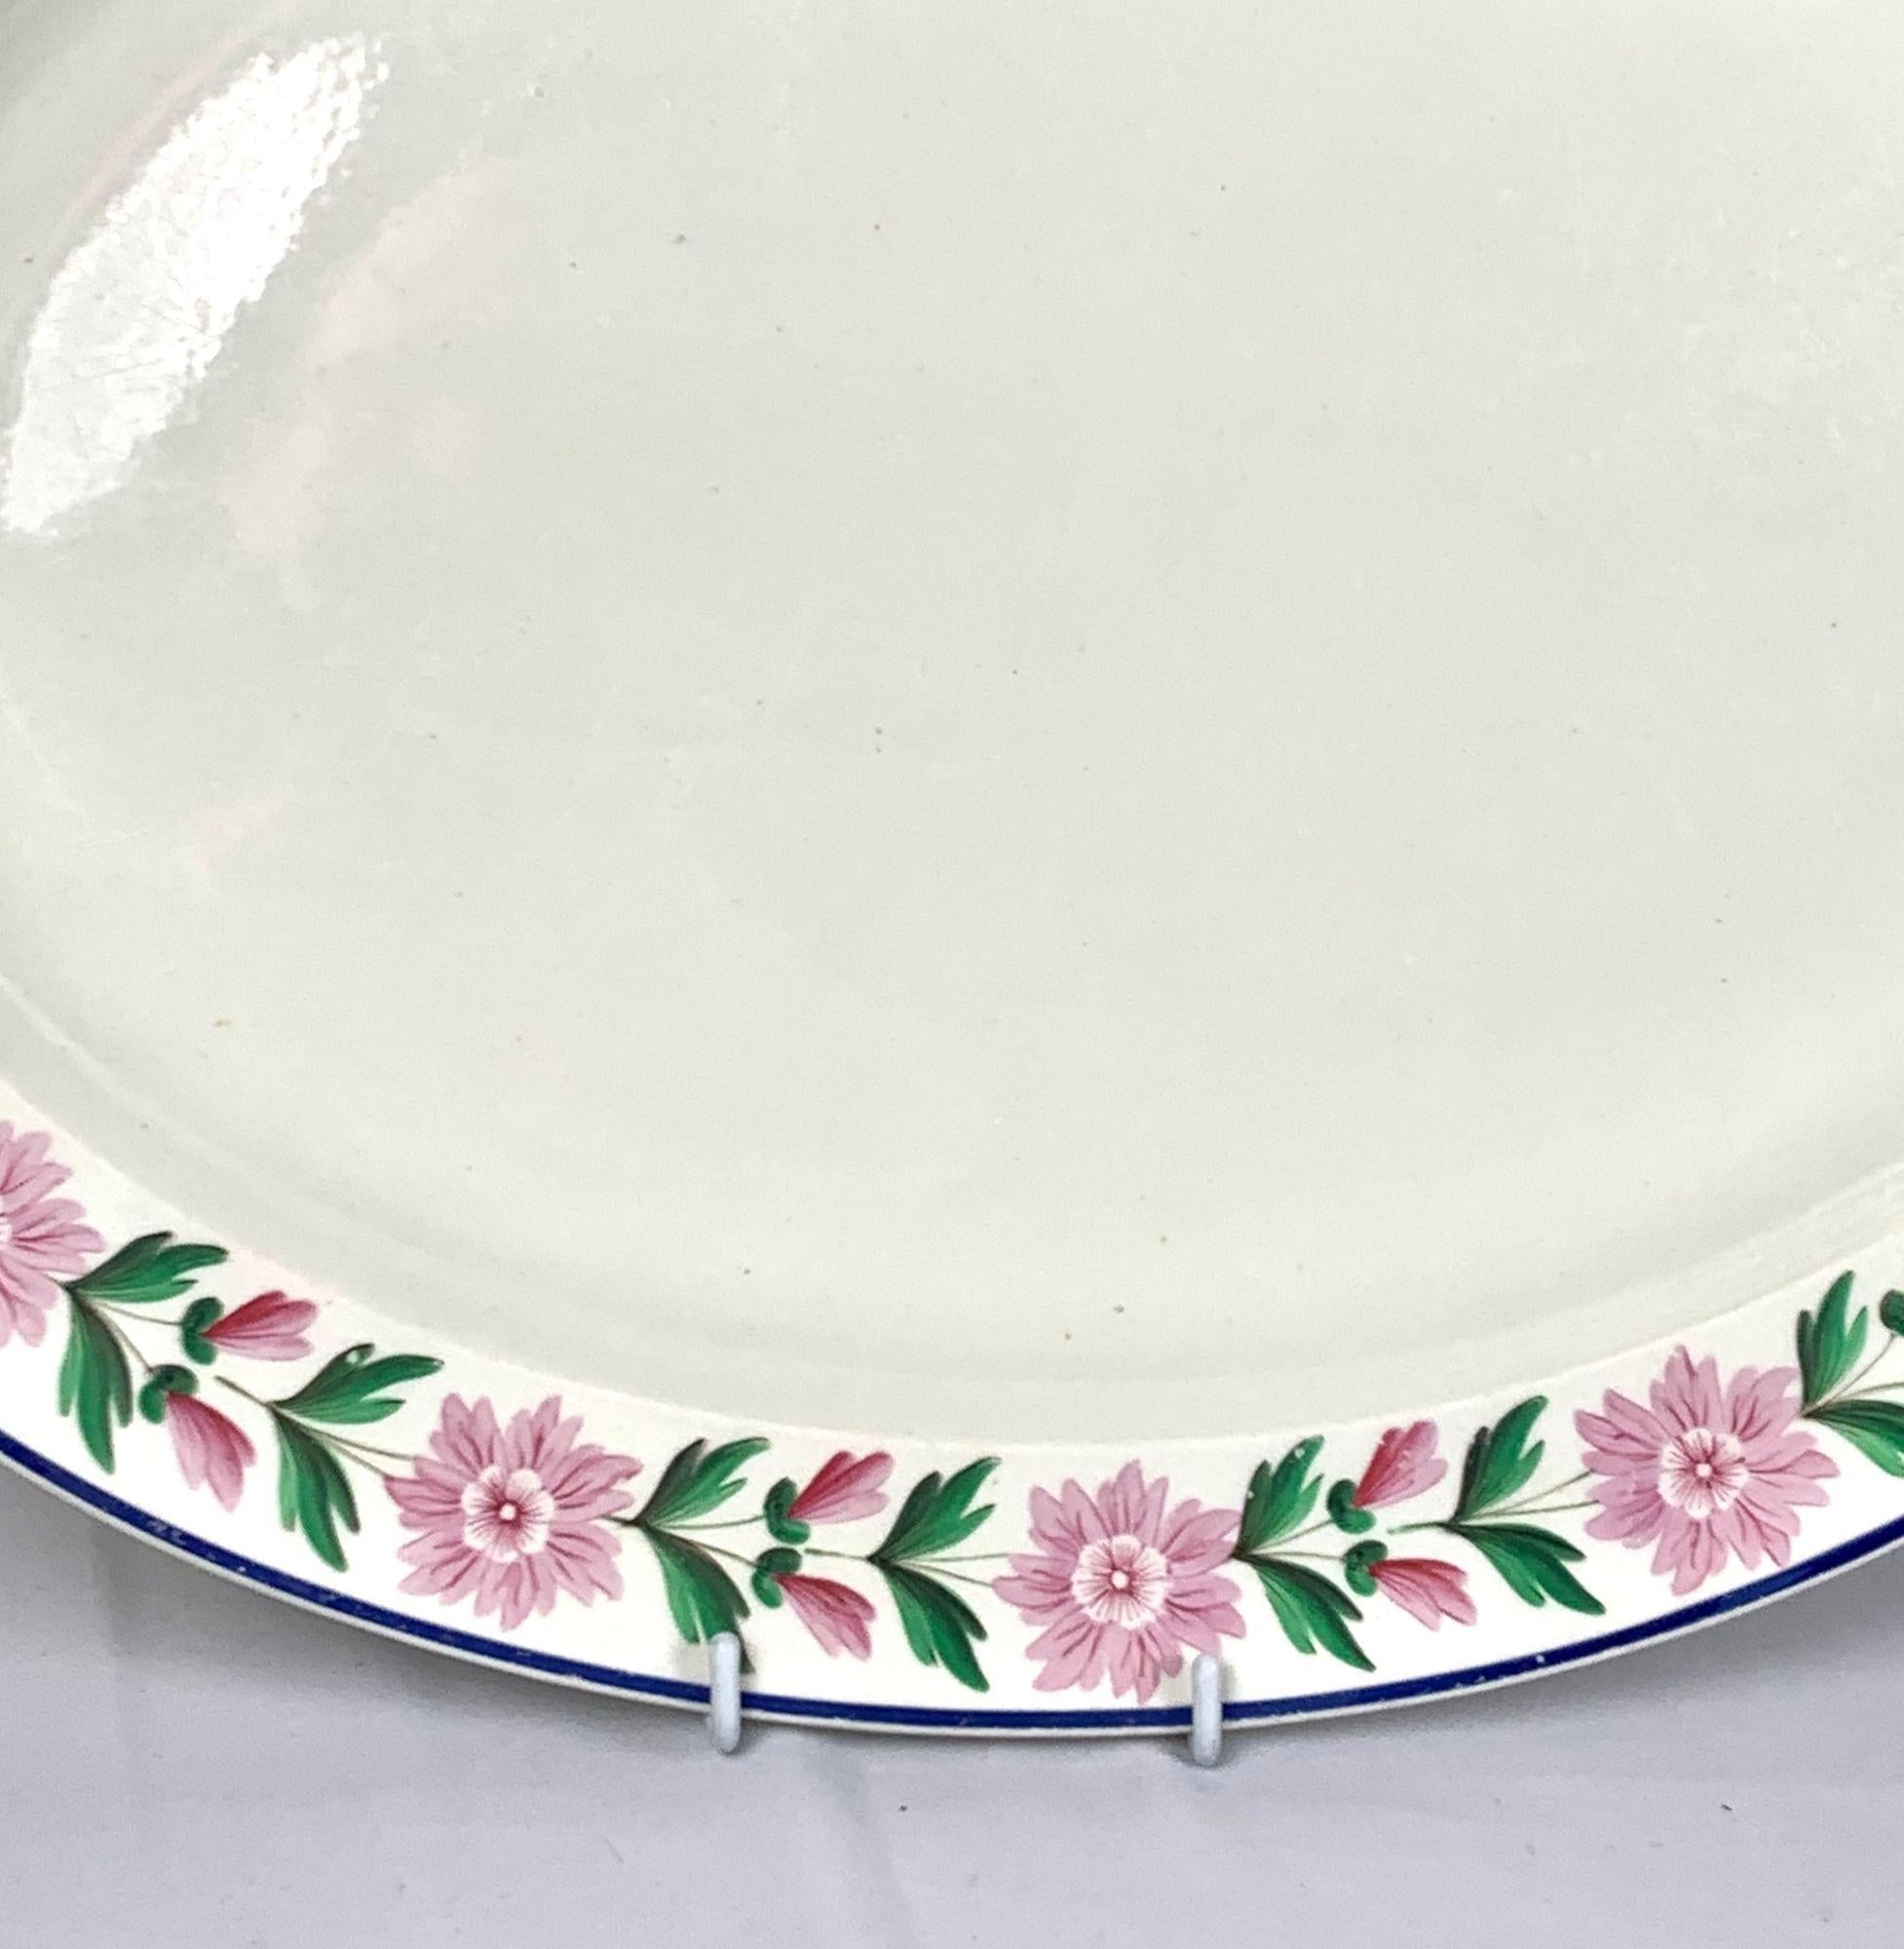 Large Wedgwood Creamware Platter England Circa 1820 In Excellent Condition For Sale In Katonah, NY